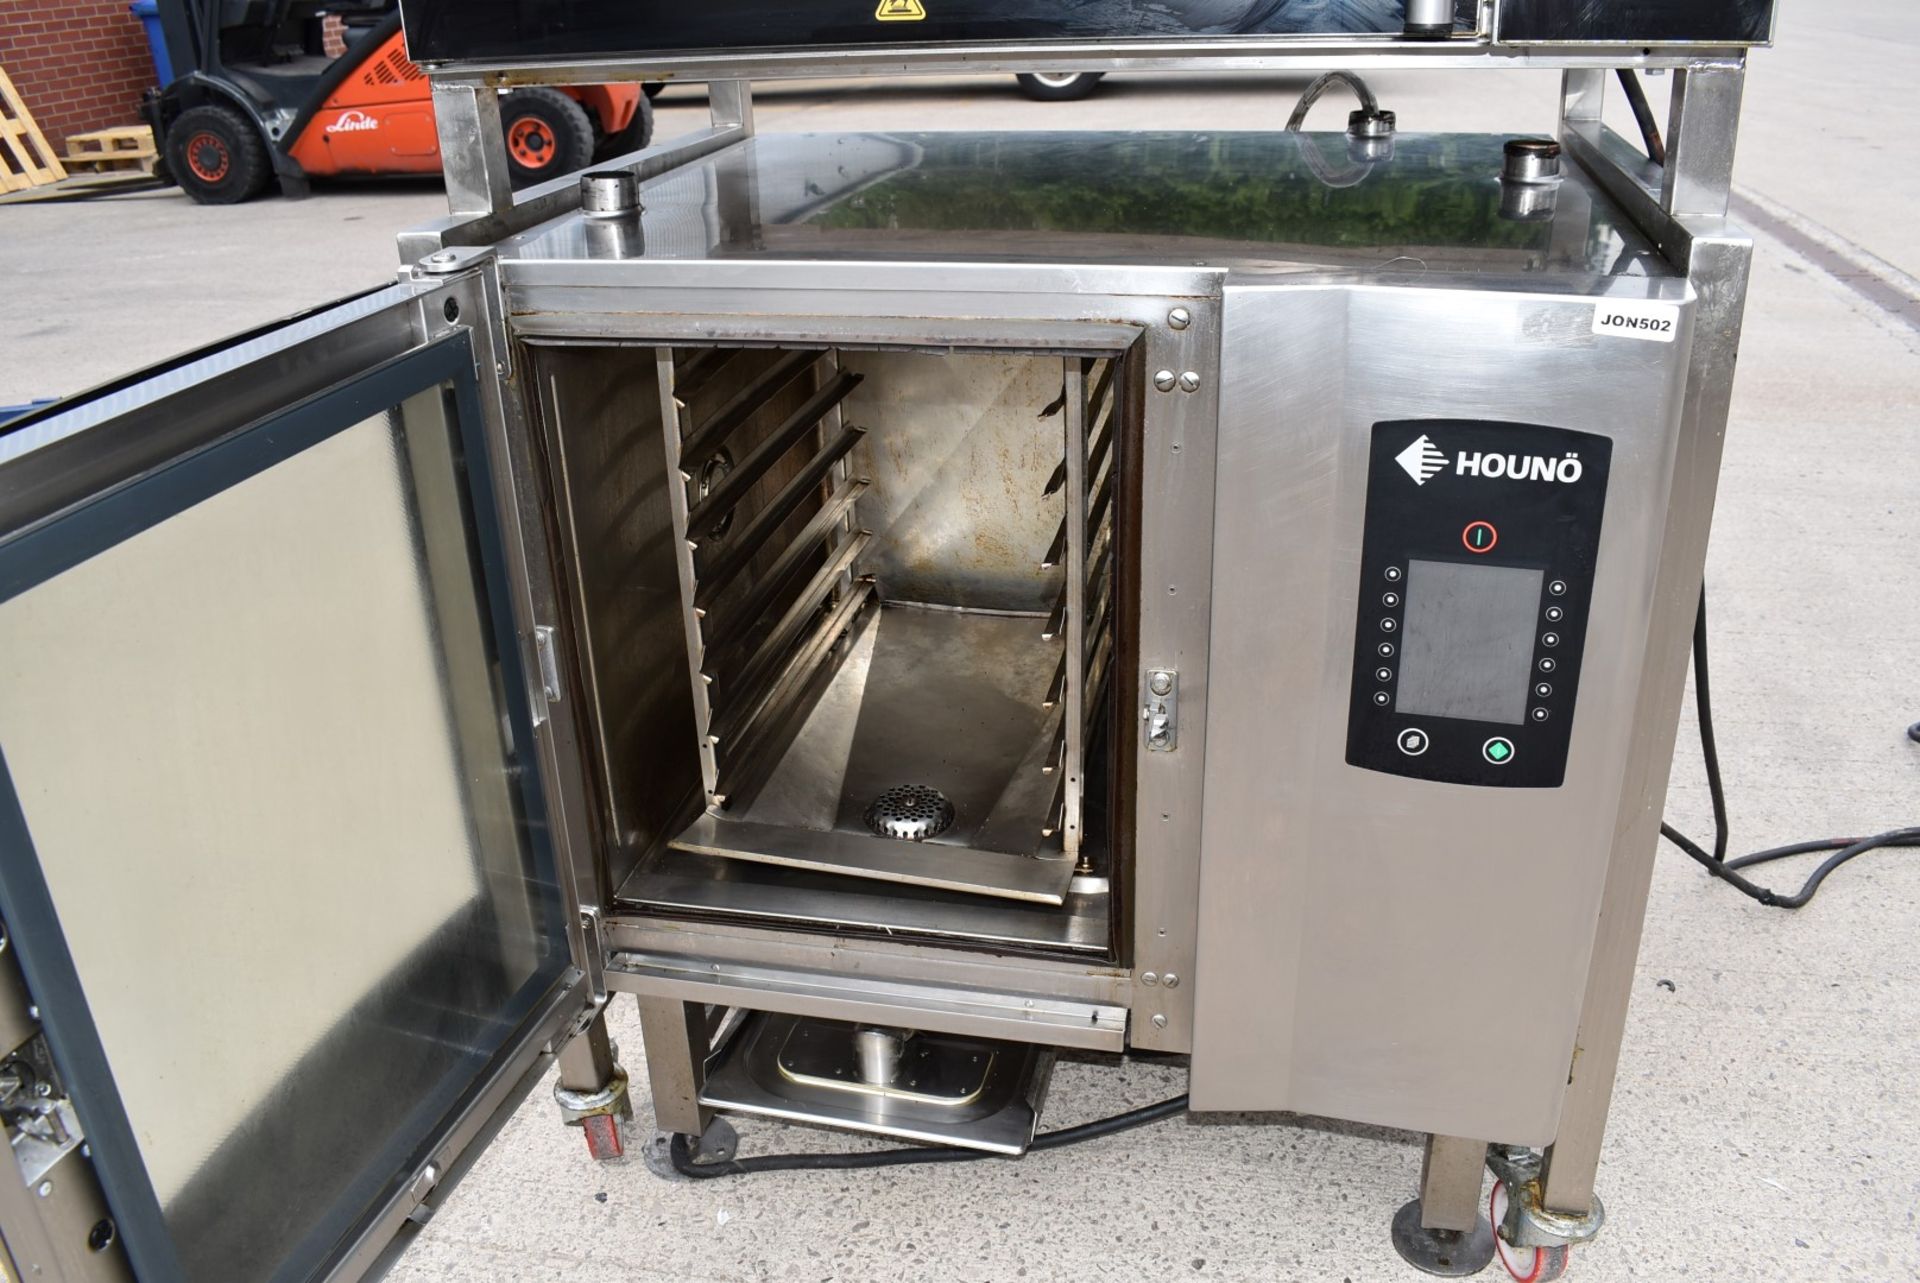 1 x Houno Electric Combi Oven and Fri-jado Rotisserie Oven Combo With Stand - 3 Phase - Image 17 of 22